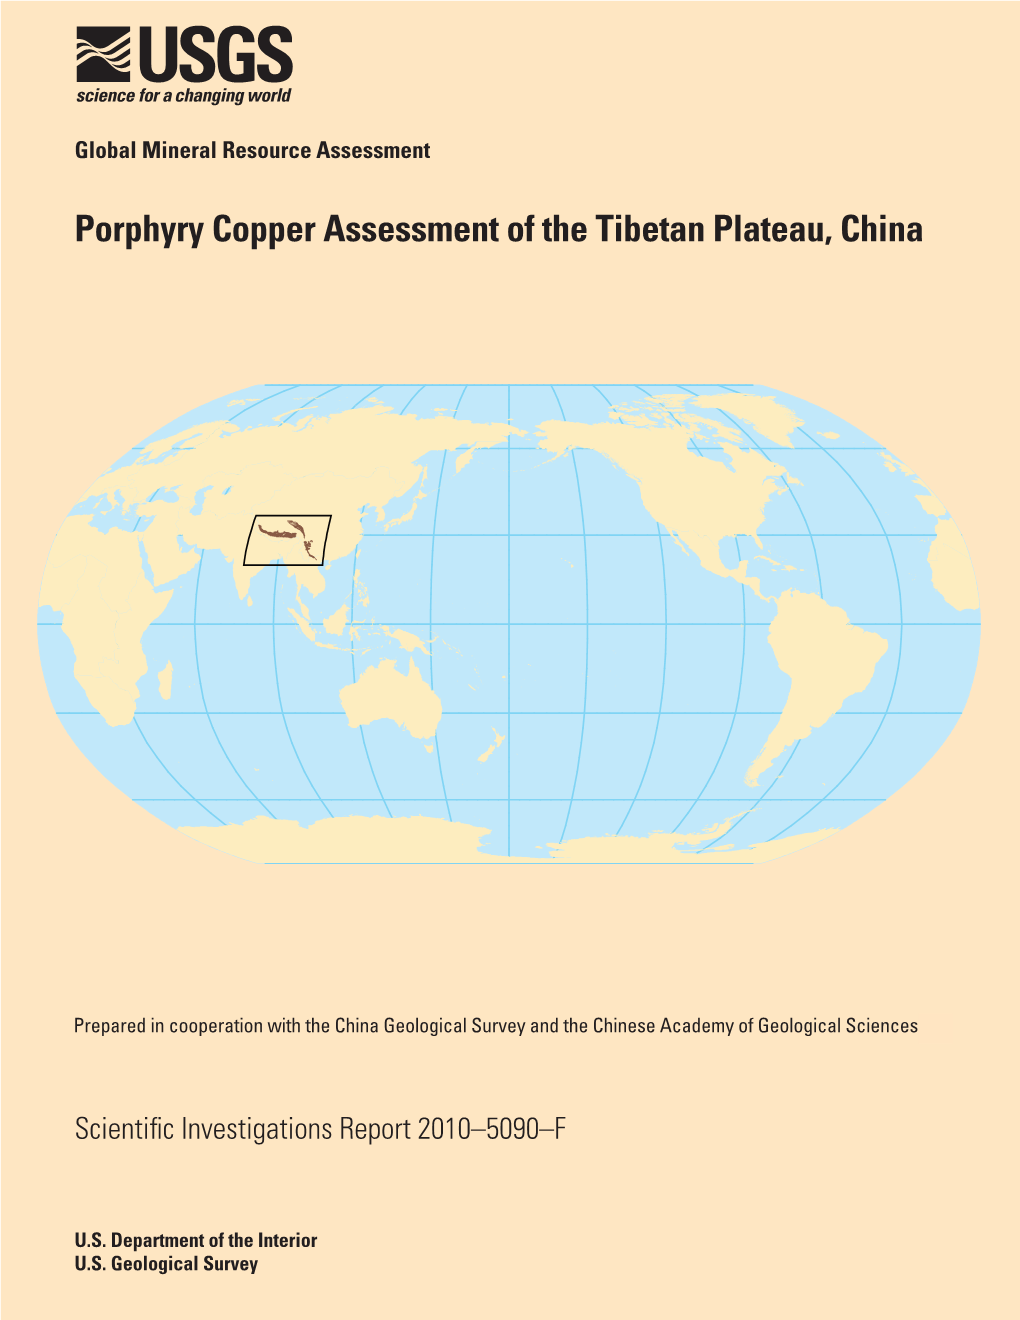 Porphyry Copper Assessment of the Tibetan Plateau, China